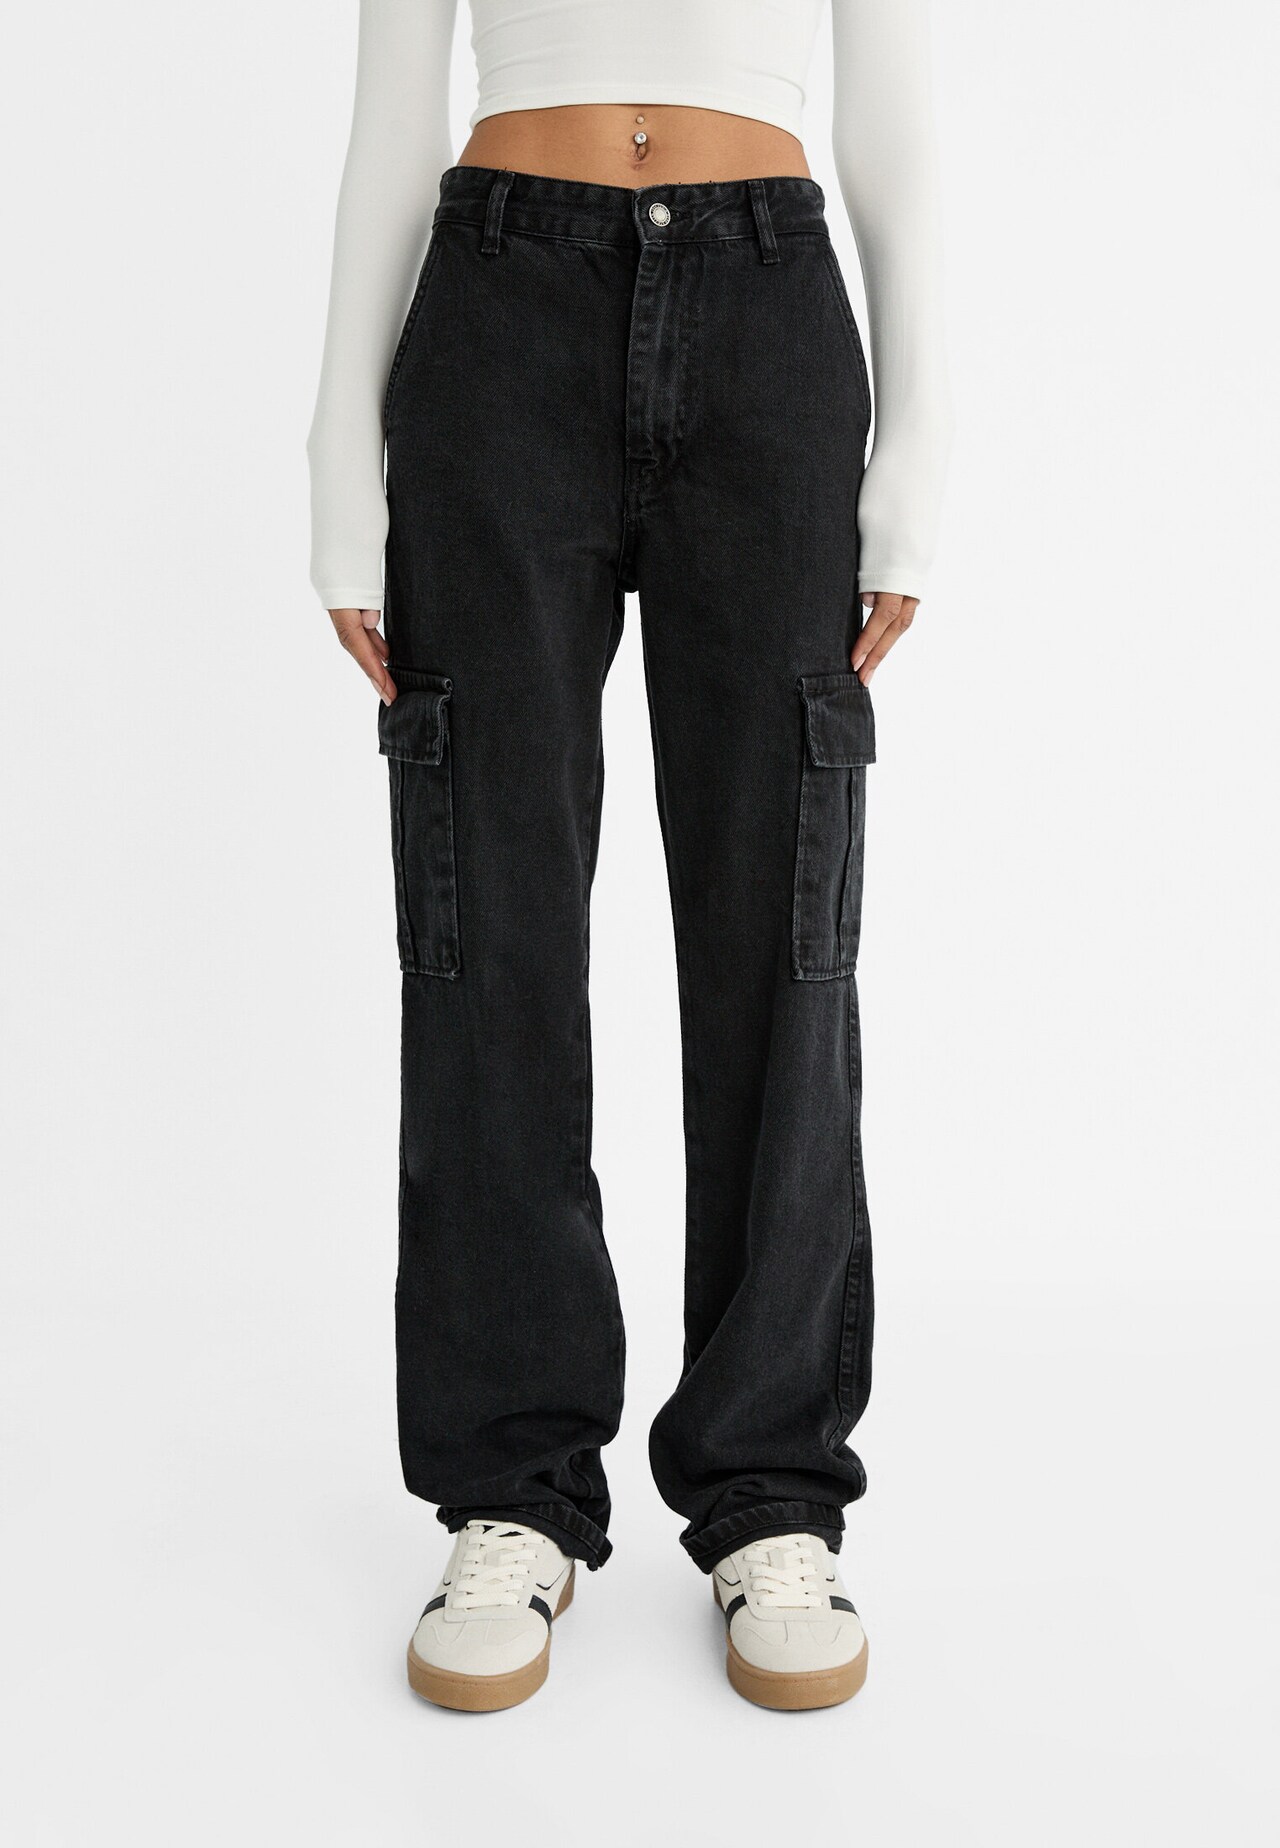 Straight fit cargo jeans - Women's fashion